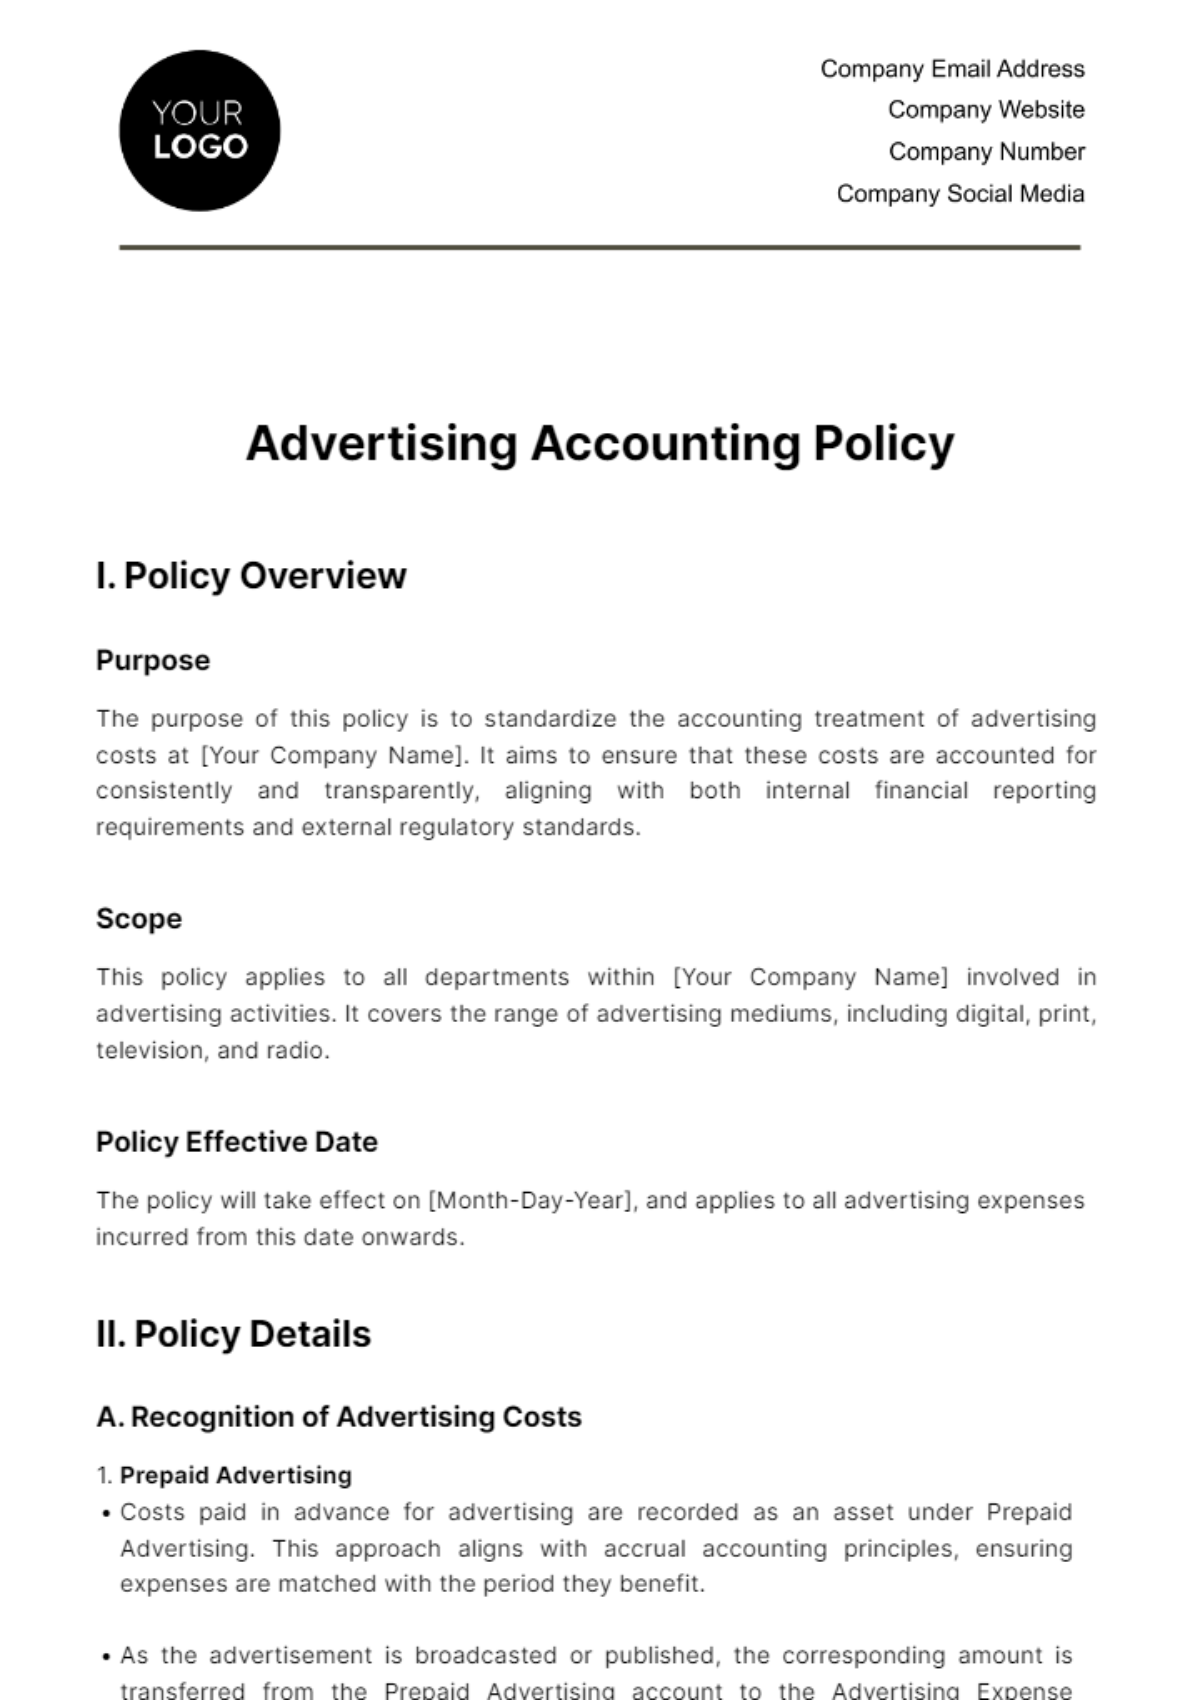 Advertising Accounting Policy Template